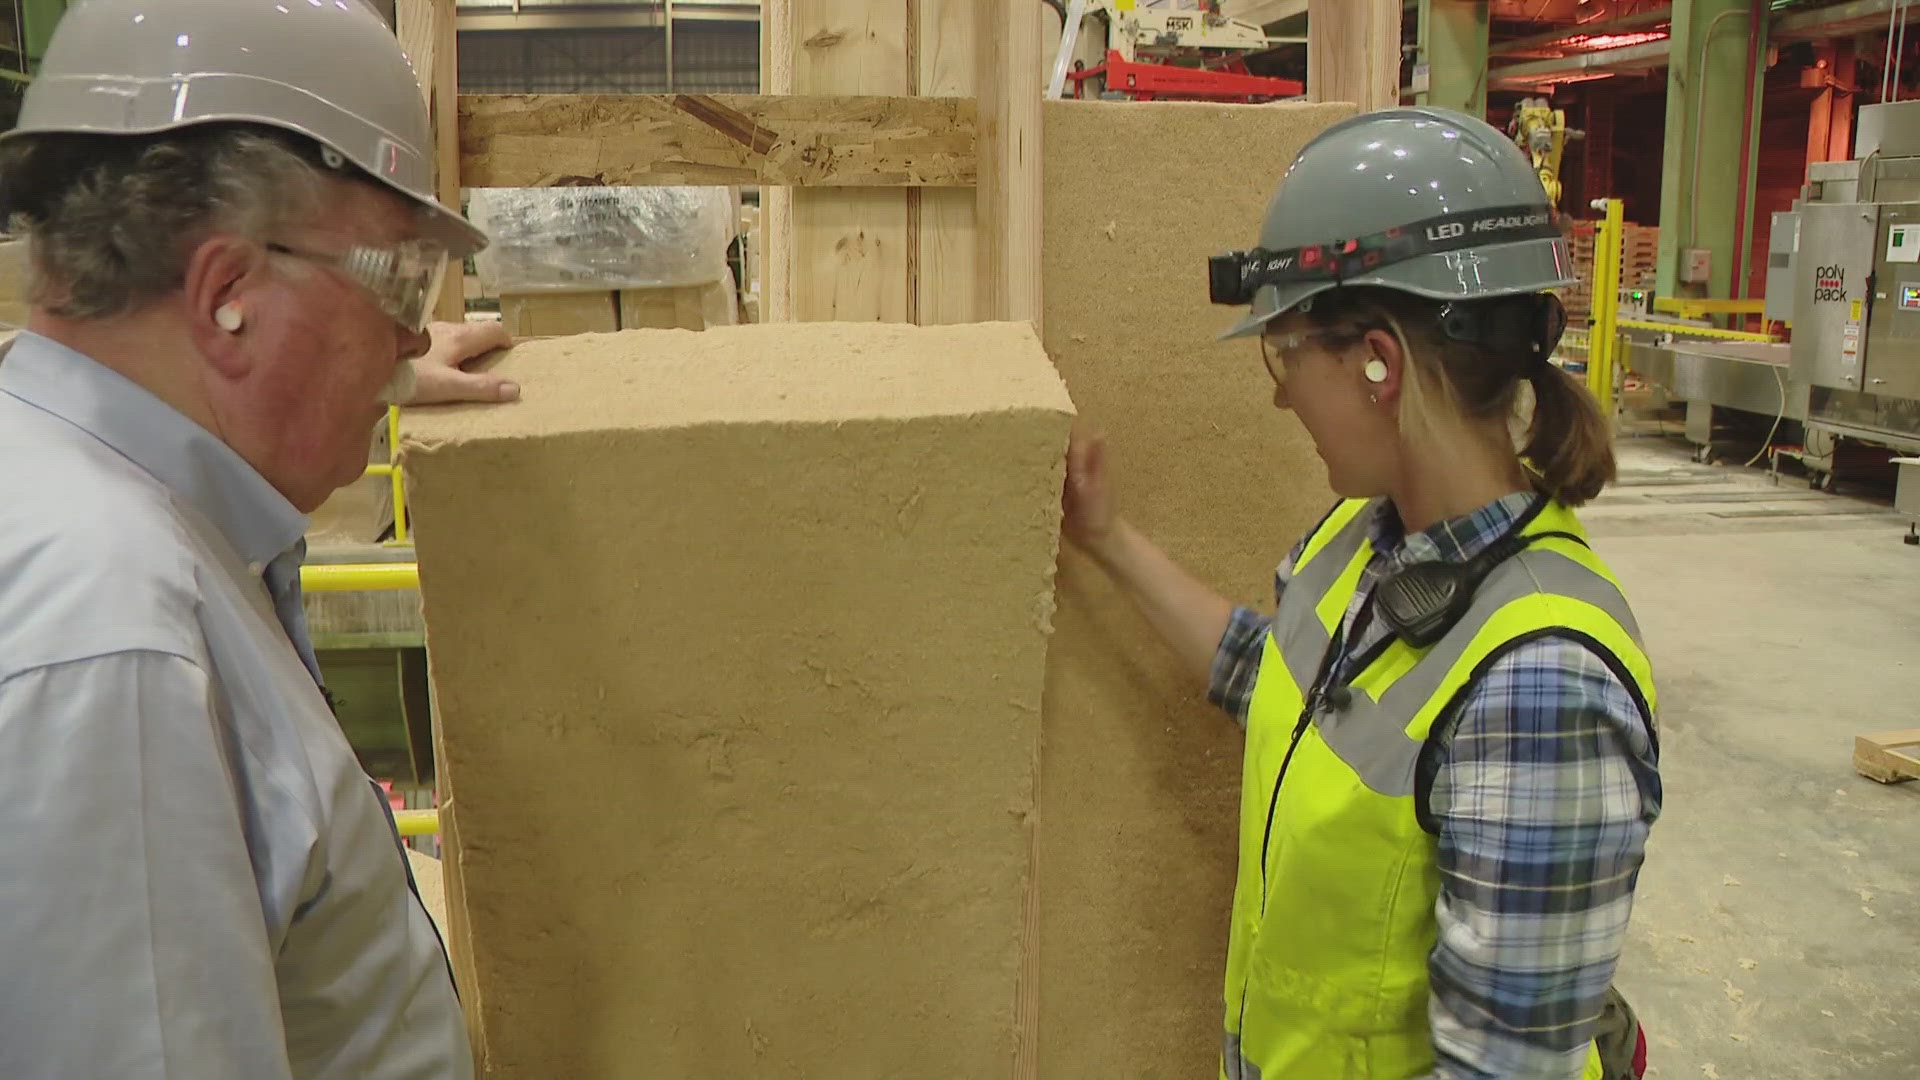 TimberHP in Madison uses waste from the lumber industry to create insulation for construction.